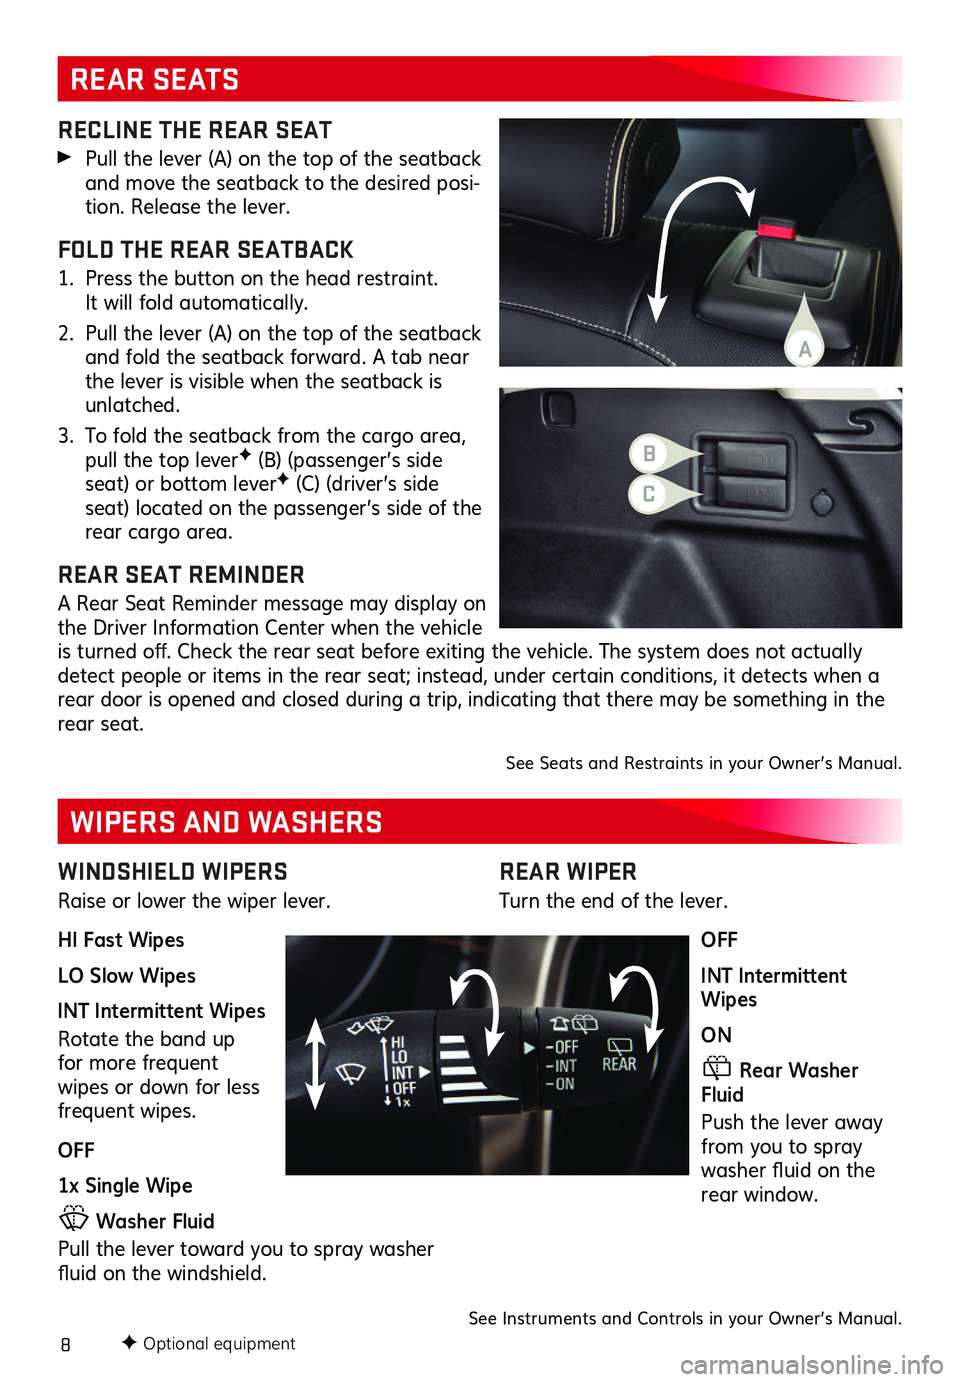 GMC TERRAIN 2020  Get To Know Guide 8
REAR WIPER
Turn the end of the lever.
OFF
INT Intermittent Wipes
ON
 Rear Washer Fluid
Push the lever away from you to spray washer fluid on the rear window.
RECLINE THE REAR SEAT
 Pull the lever (A